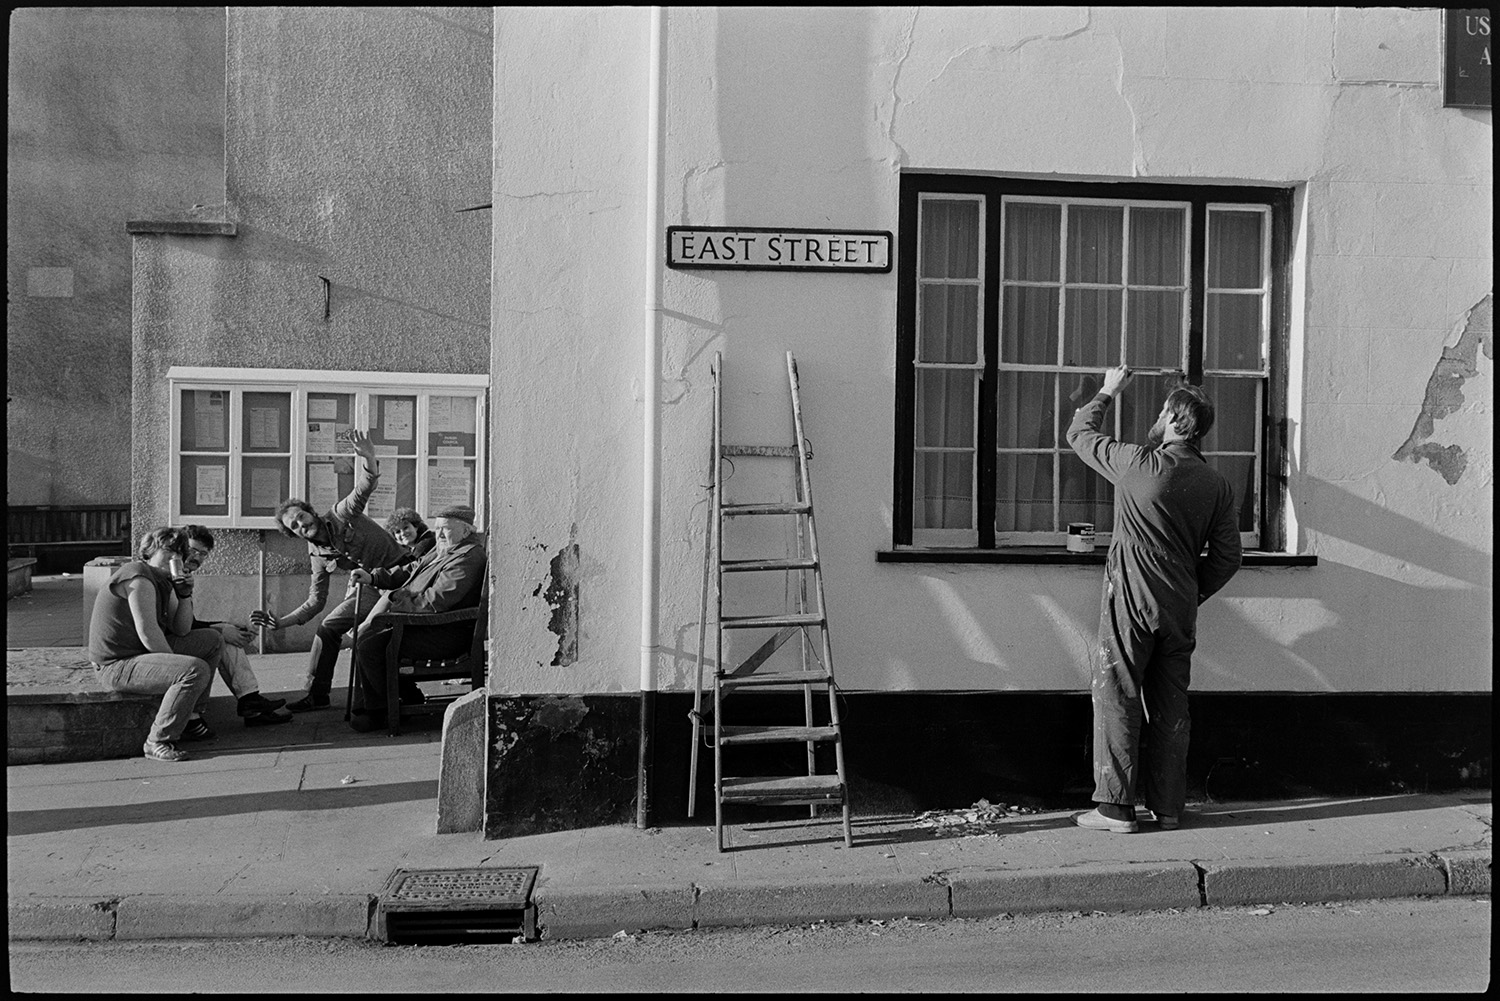 Street scenes with painter working on window, cyclists and passers by. Public house. 
[A man painting the window frames of the Red Lion Hotel  in East Street, Chulmleigh. His ladder is lent against the wall next to him. People sat on a bench, by a noticeboard next to the pub, are waving at the camera.]